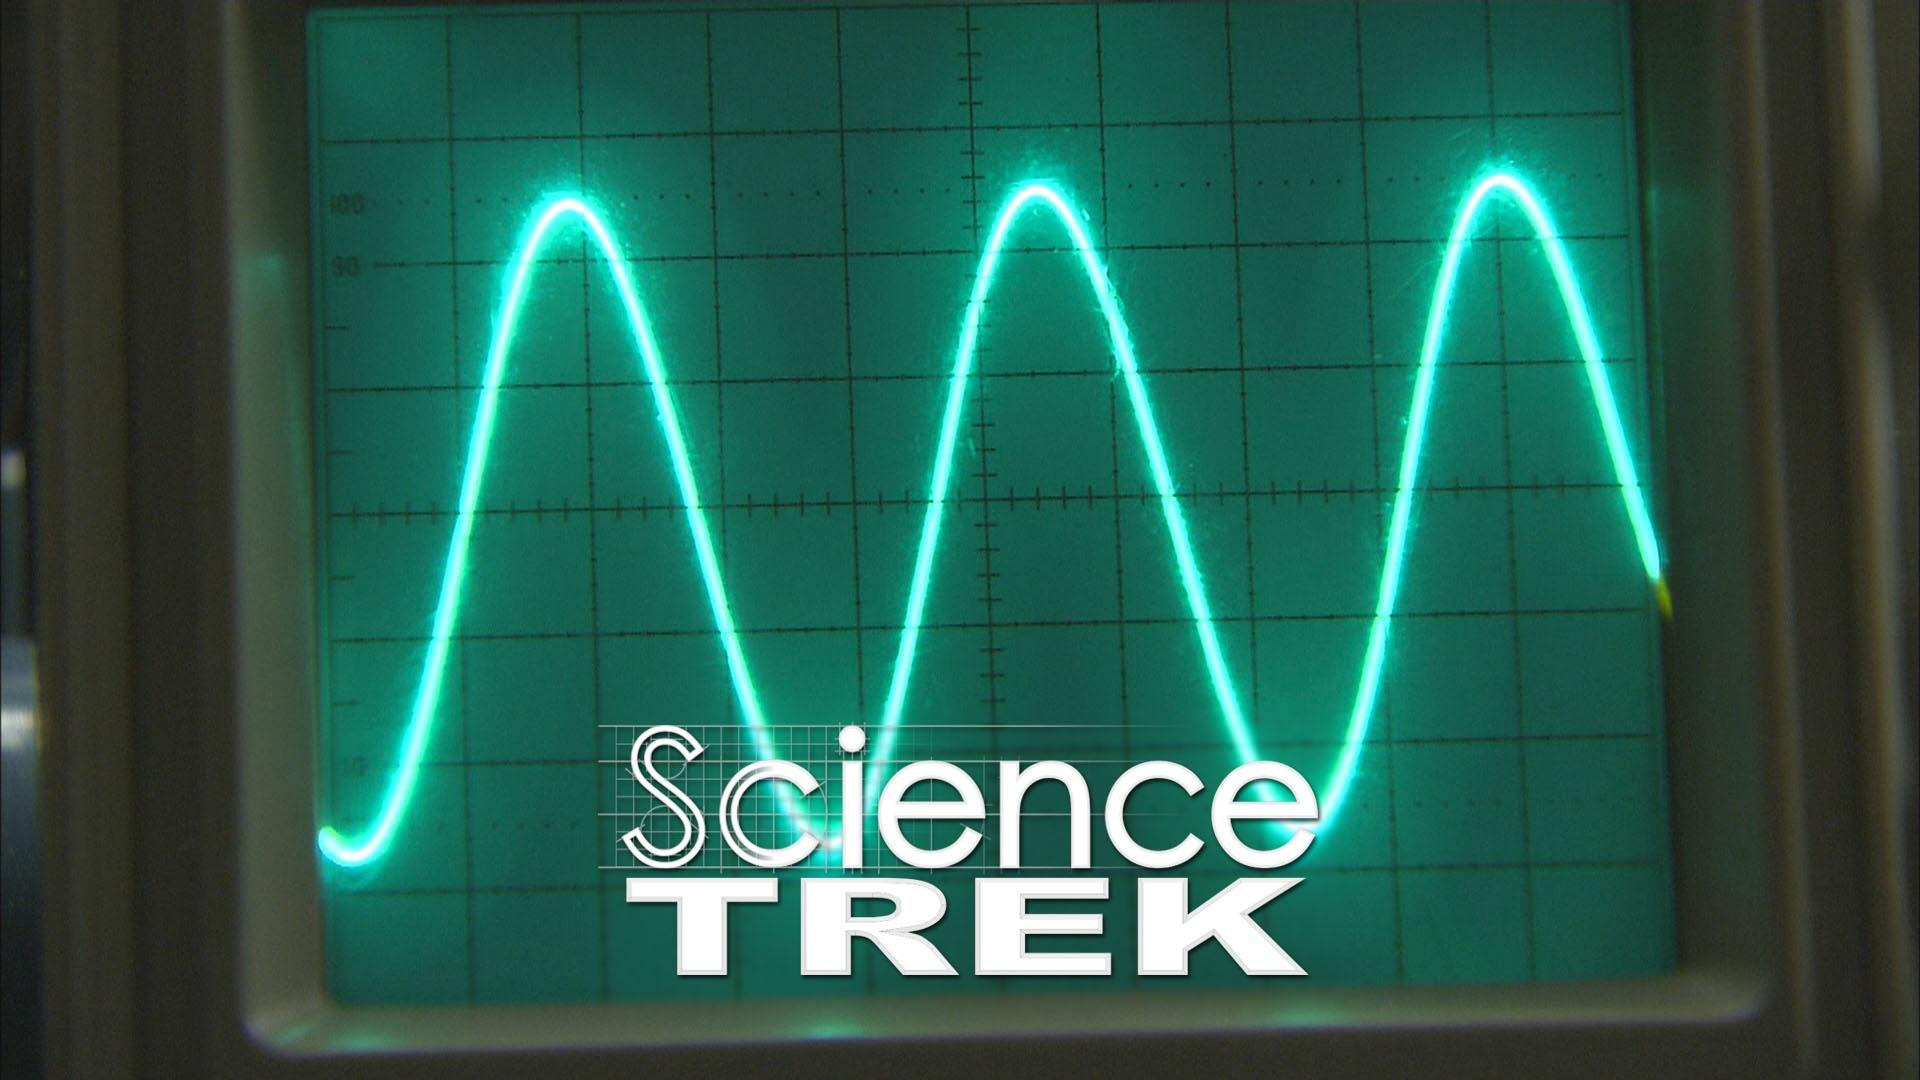 Sound: The Science of Sound | Science Trek | PBS LearningMedia